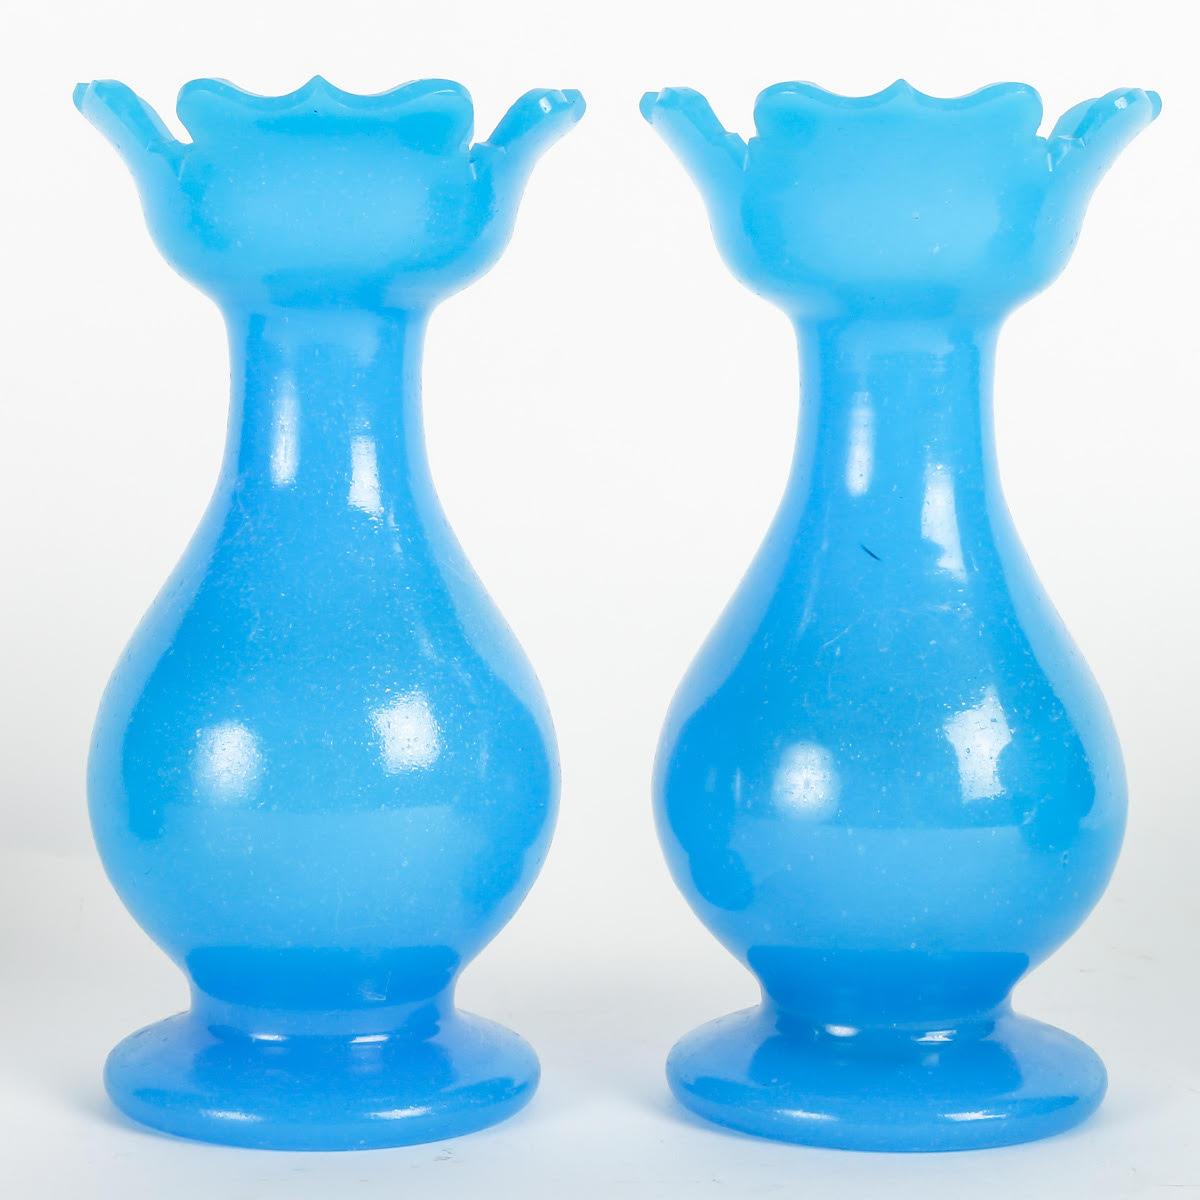 Blue Opaline set, 19th century, Napoleon III period.

A circular box, two small baluster vases and two spittoons, 19th century, Napoleon III period.

Dimensions:

Box: h: 11cm, d: 8cm

Vases: h: 15cm

Spittoons: h: 12cm, d: 22cm